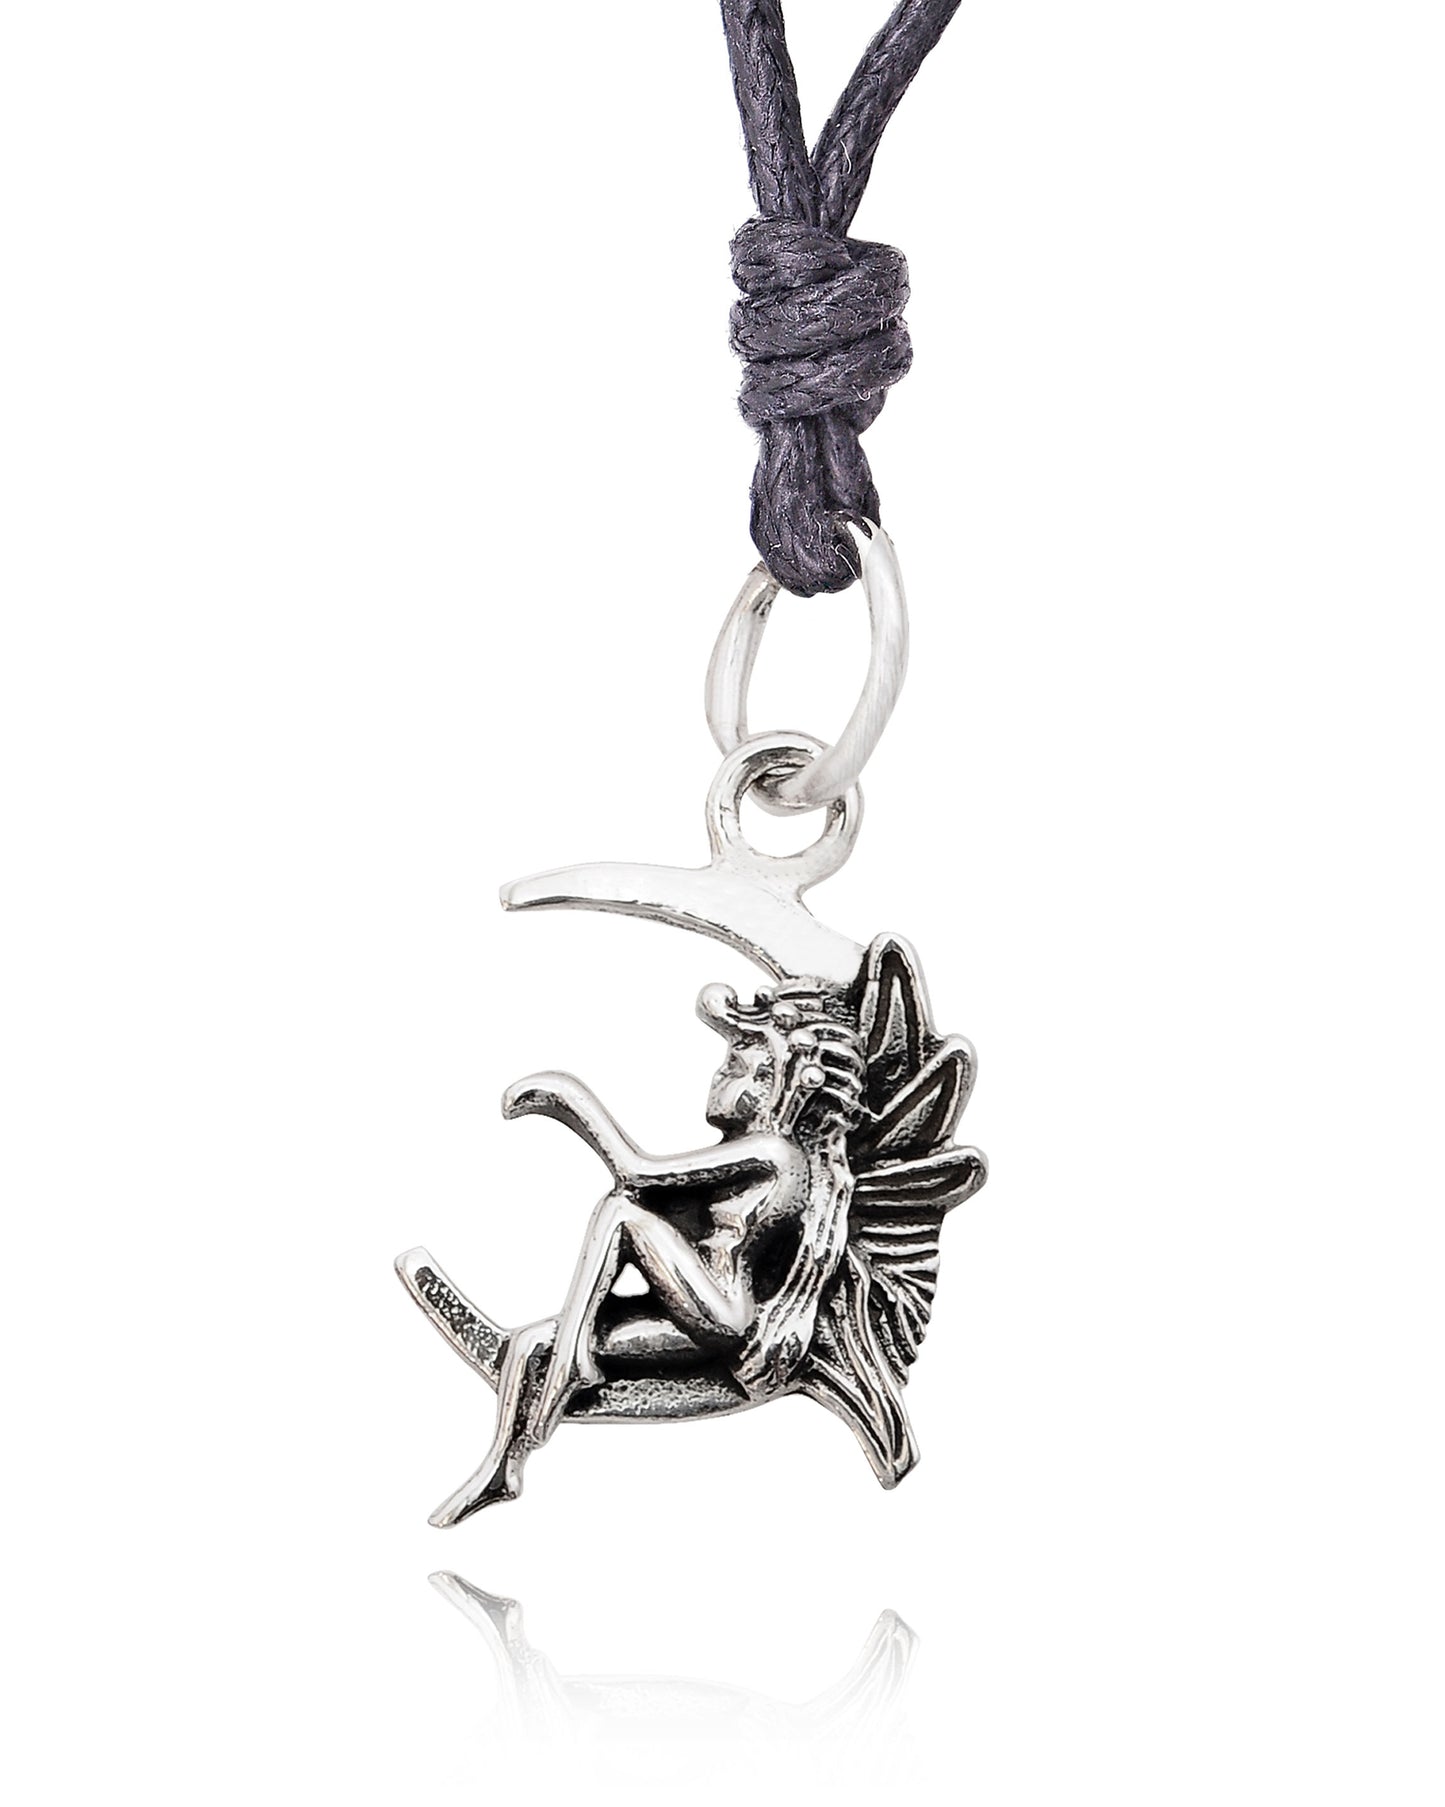 Fairy Moon Woman 92.5 Sterling Silver Charm Necklace Pendant Jewelry